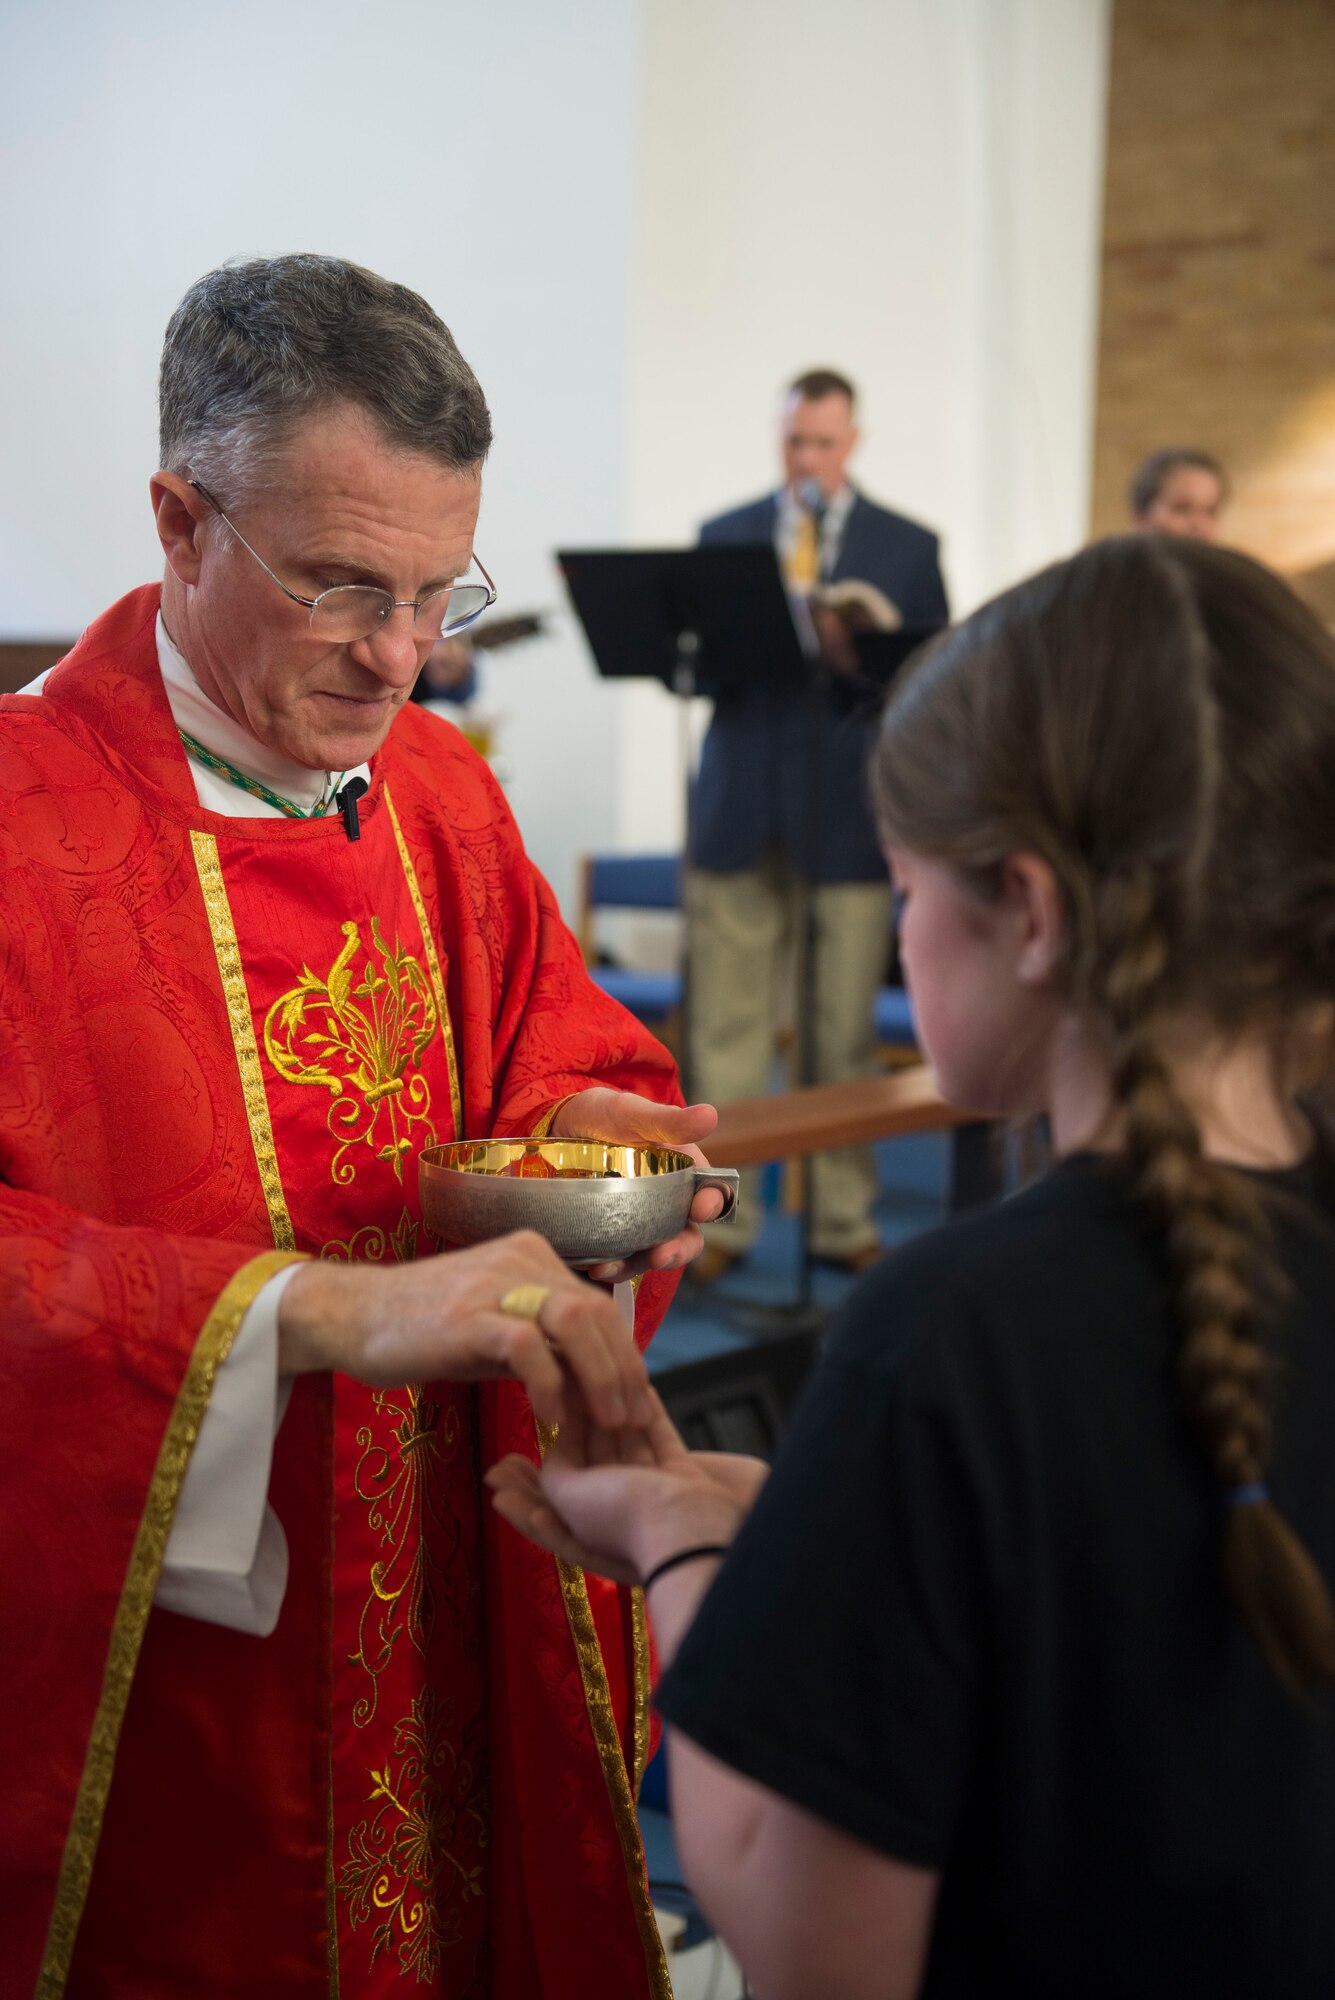 Archbishop for the Military Services Timothy Broglio gives communion to a child during the final catholic mass at RAF Mildenhall, England, May 14, 2018. Broglio visited RAF Mildenhall to give one last sermon before the move to RAF Lakenheath. (U.S. Air Force photo by Airman 1st Class Alexandria Lee)